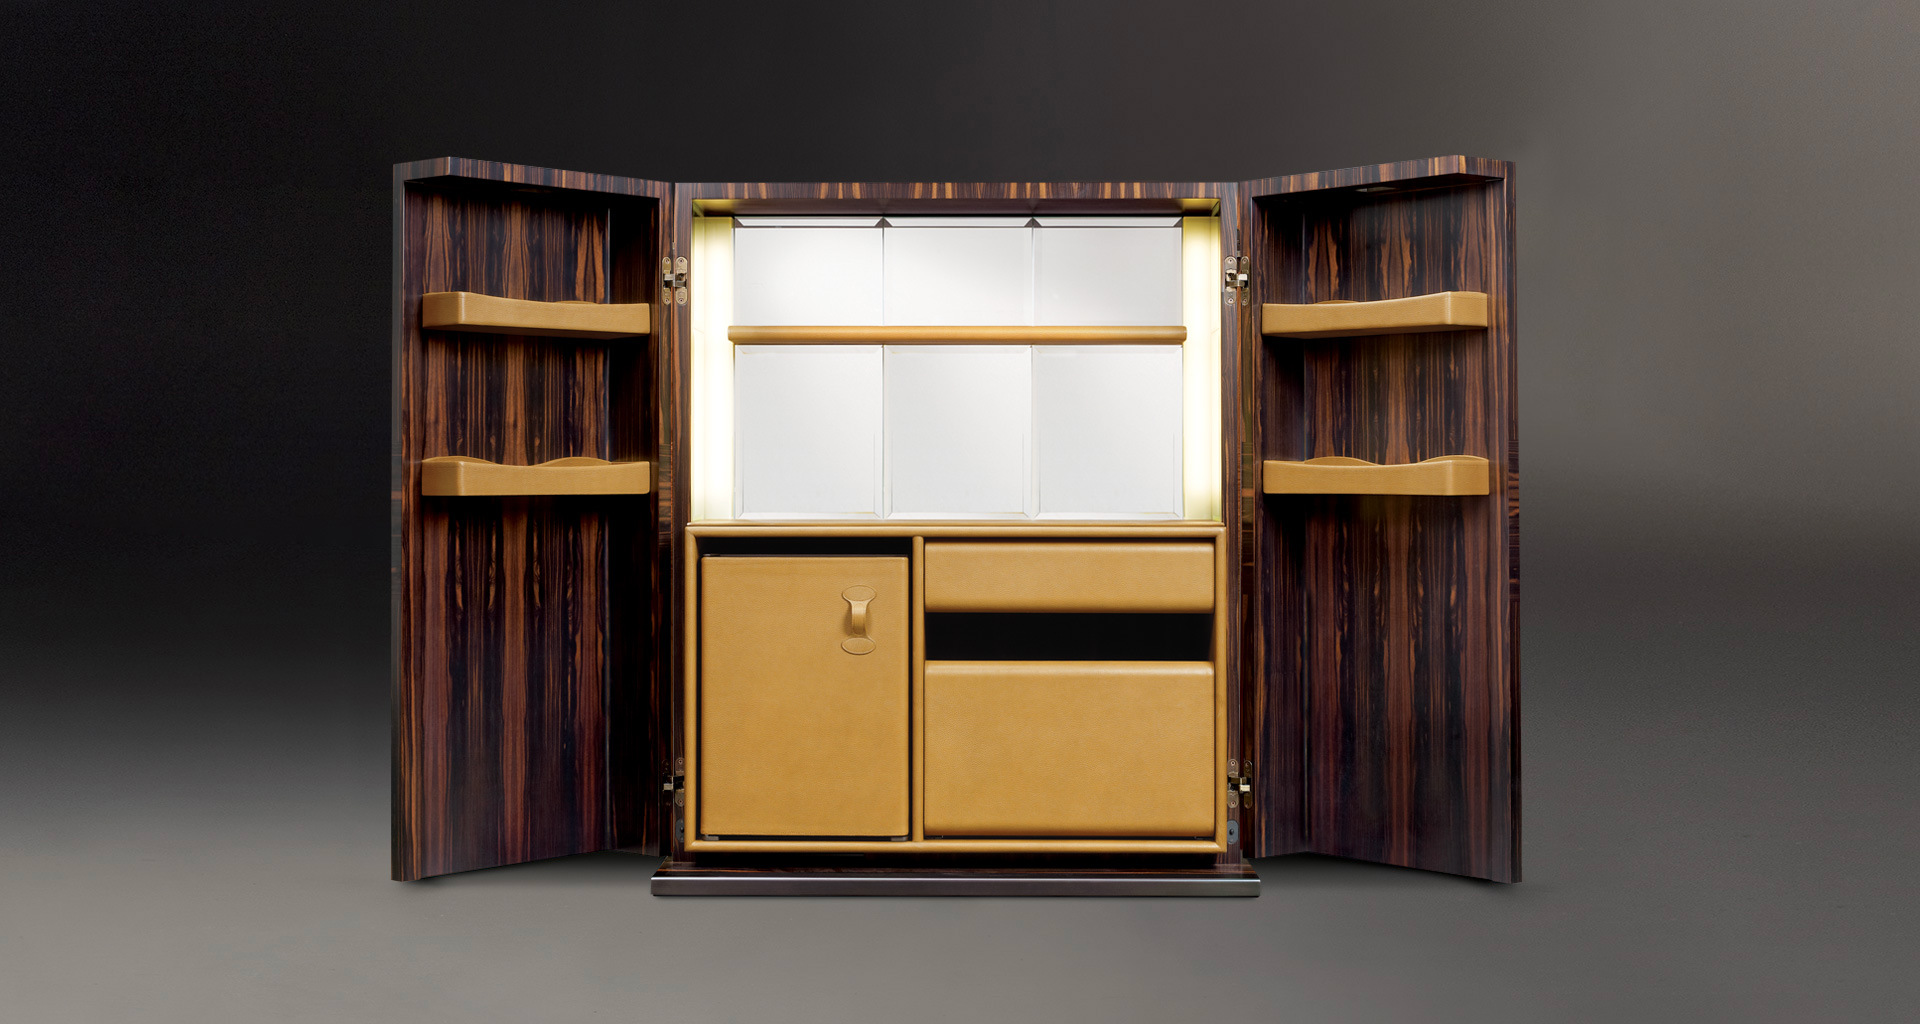 Inside of Bacco, a wooden cabinet-bar with several accessories inside and bronze base, profiles and handles, from Promemoria's catalogue | Promemoria